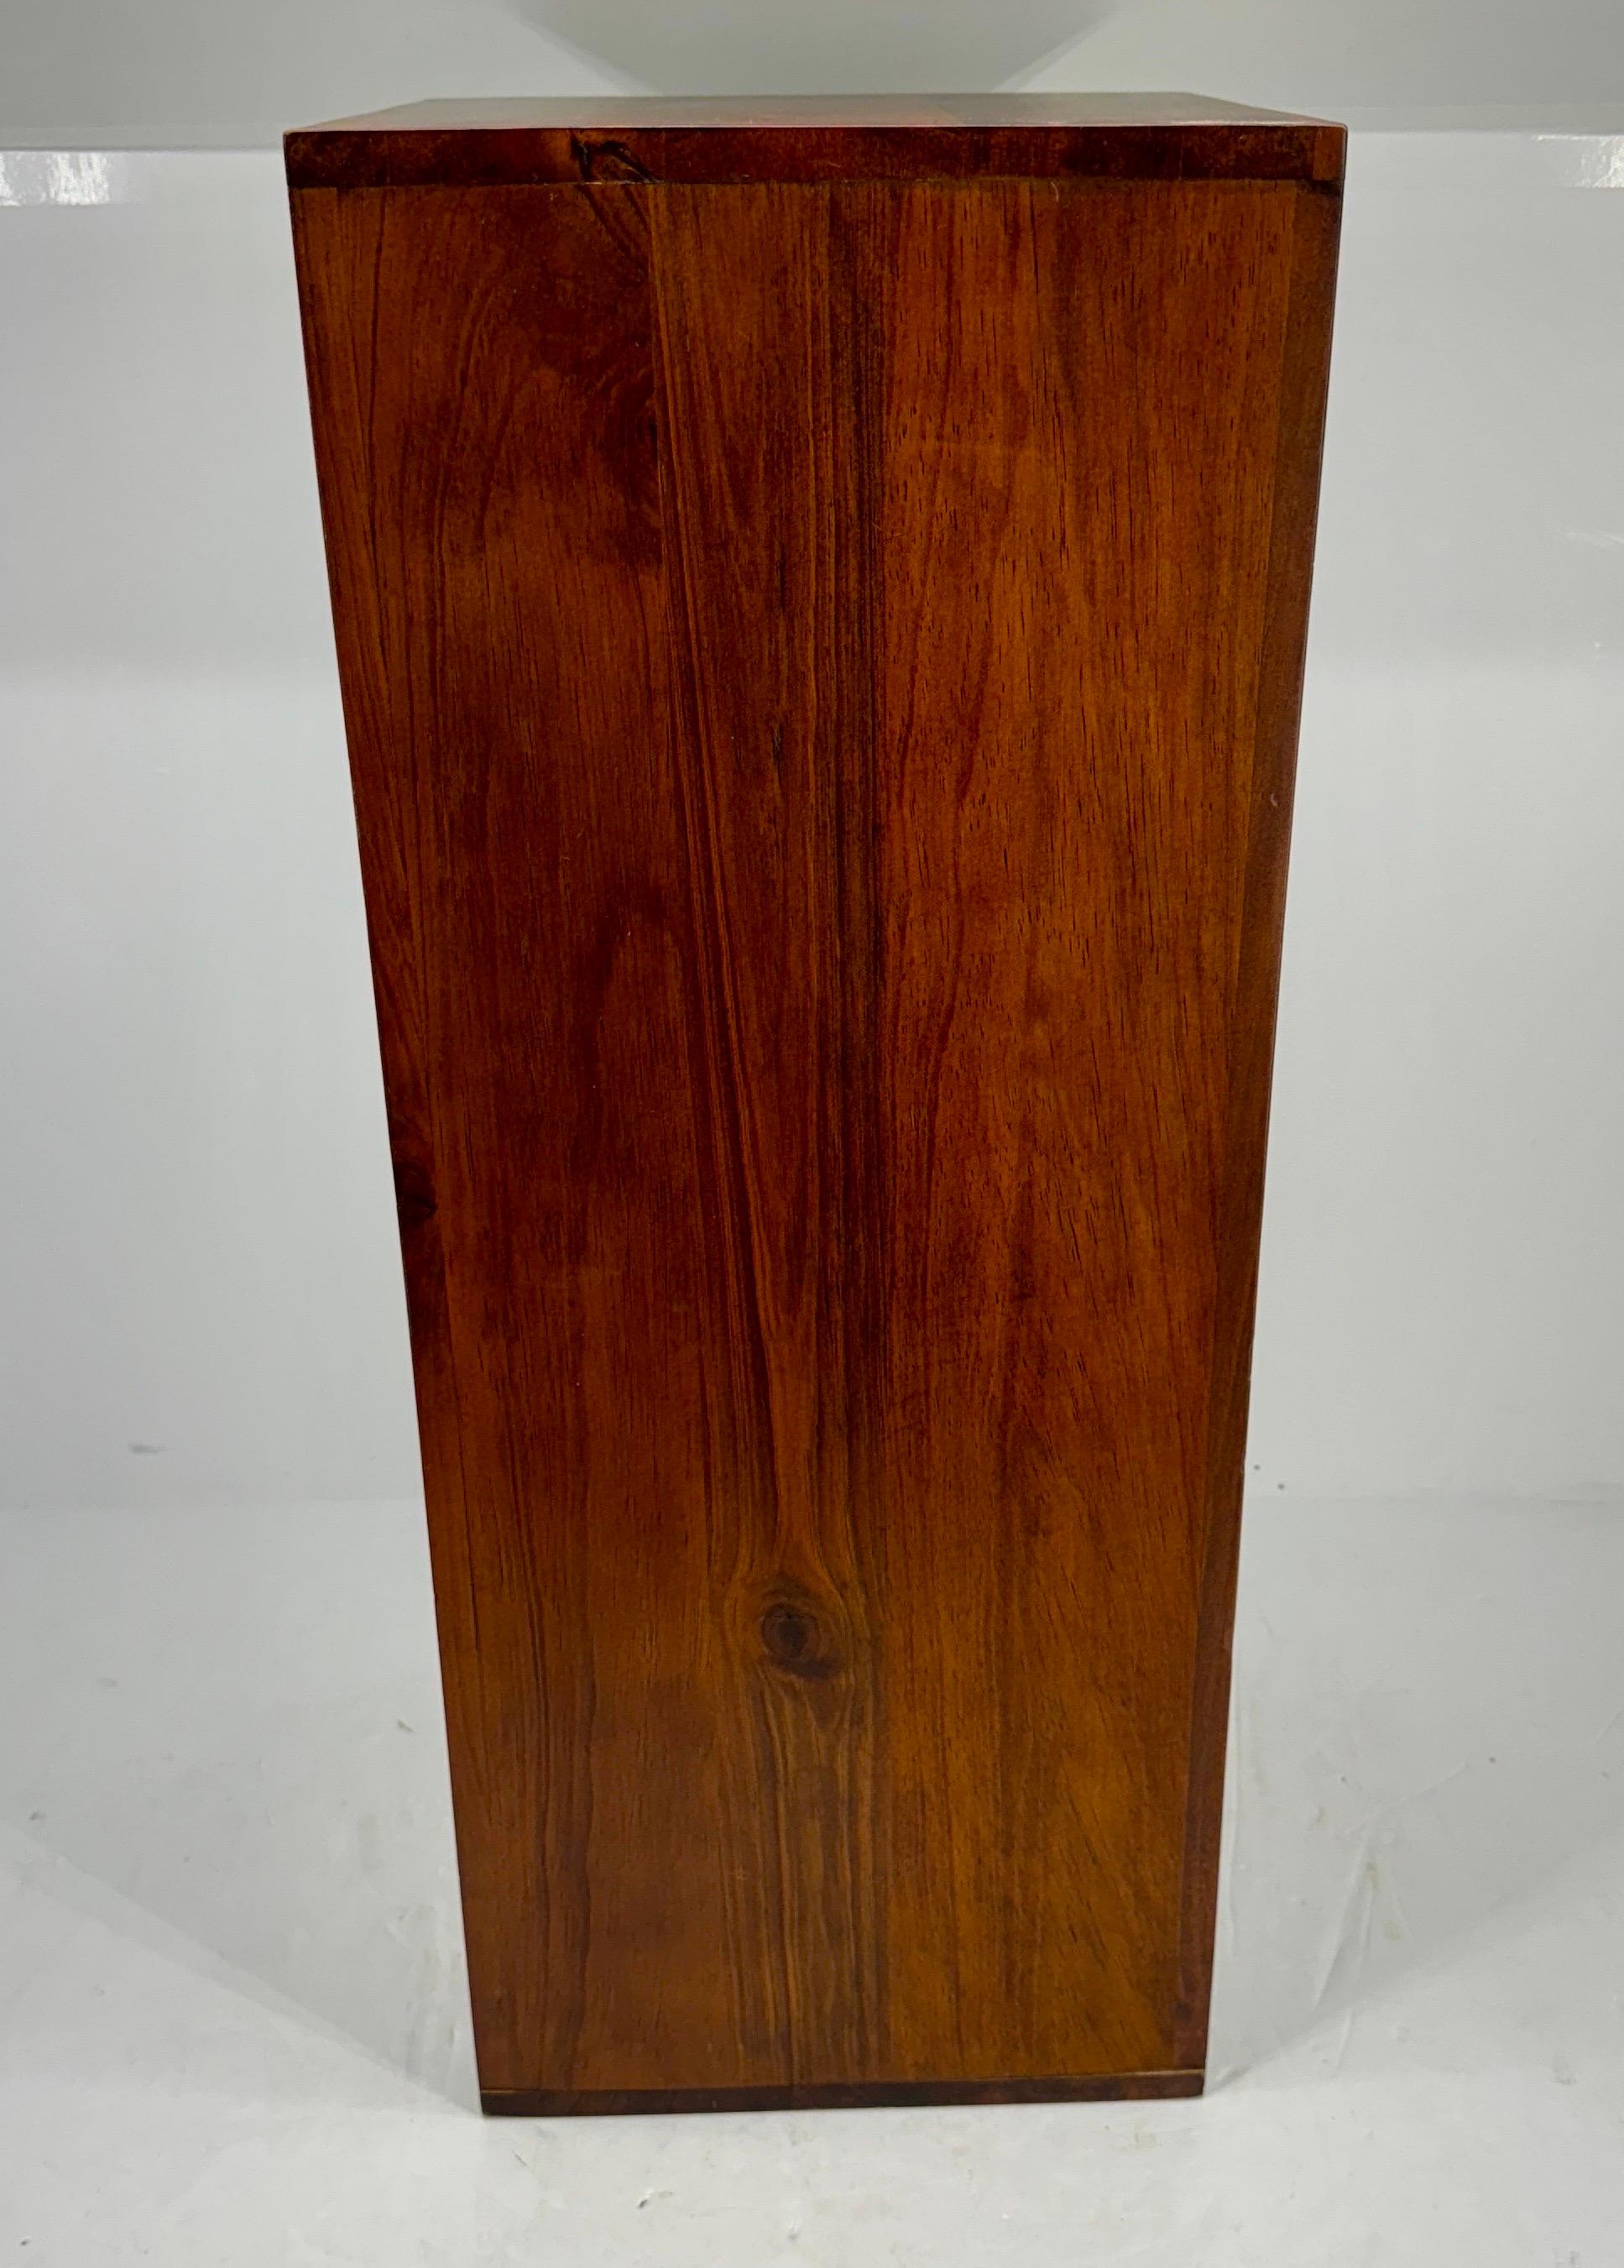 Hand-Crafted Scandinavian Mid-Century Modern Rosewood Square Pedestal Stand